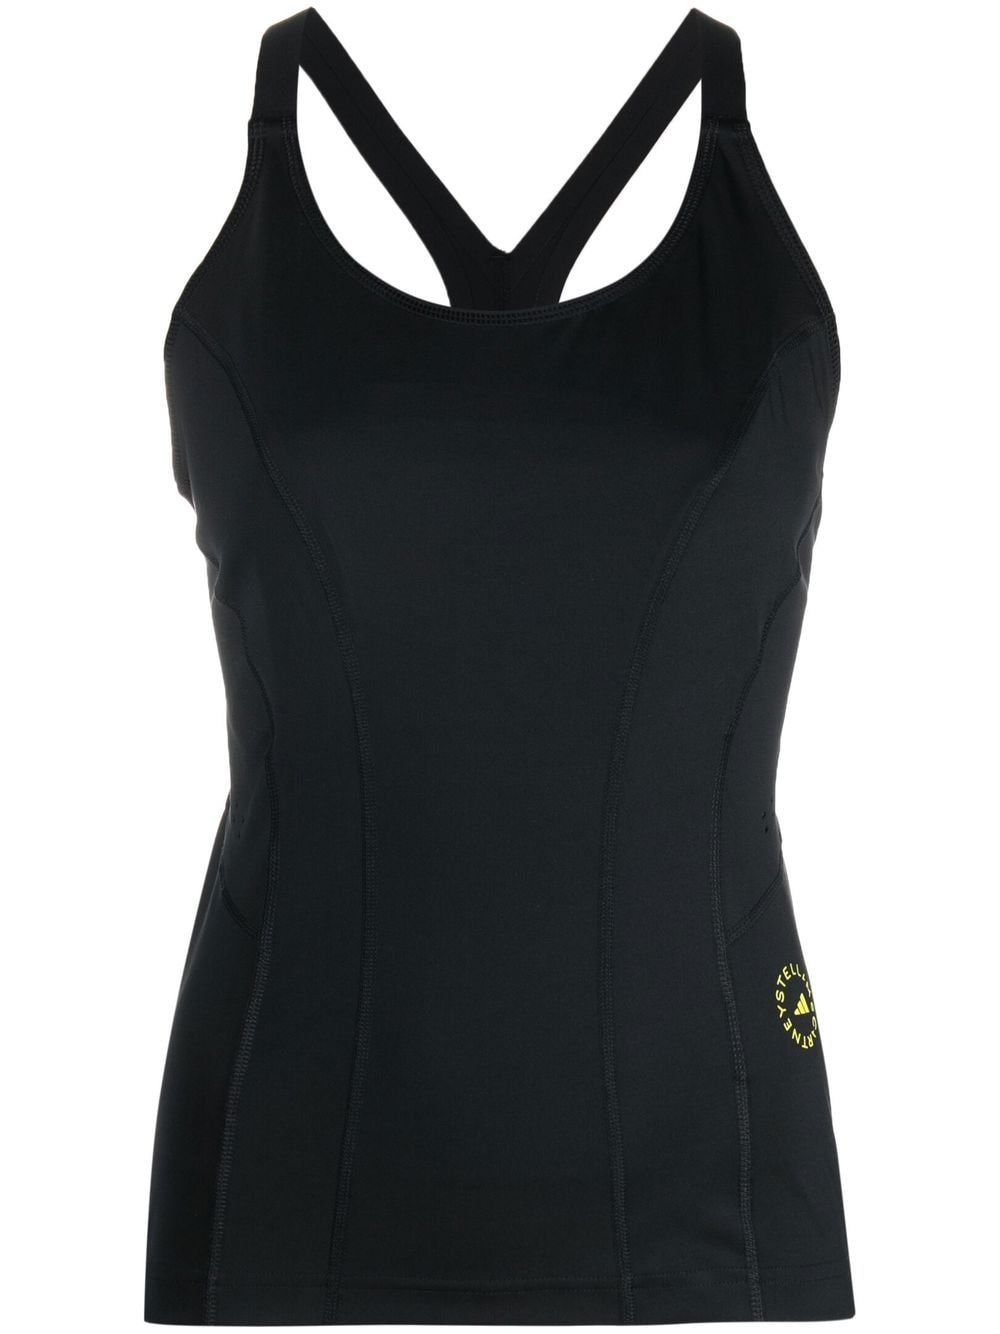 adidas by Stella McCartney cross-strap fitted tank top - Black